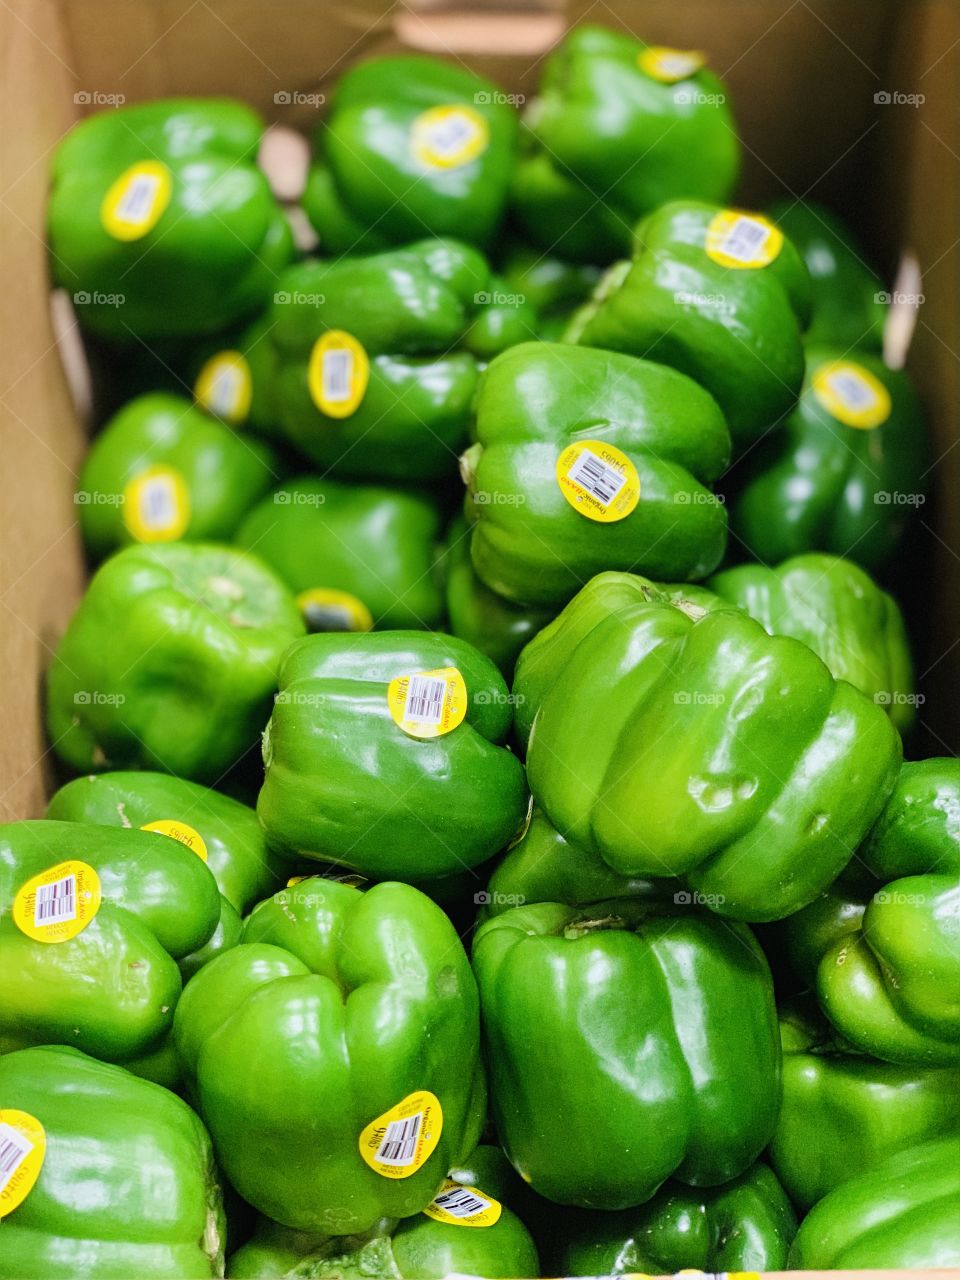 Org green peppers unwrapped 